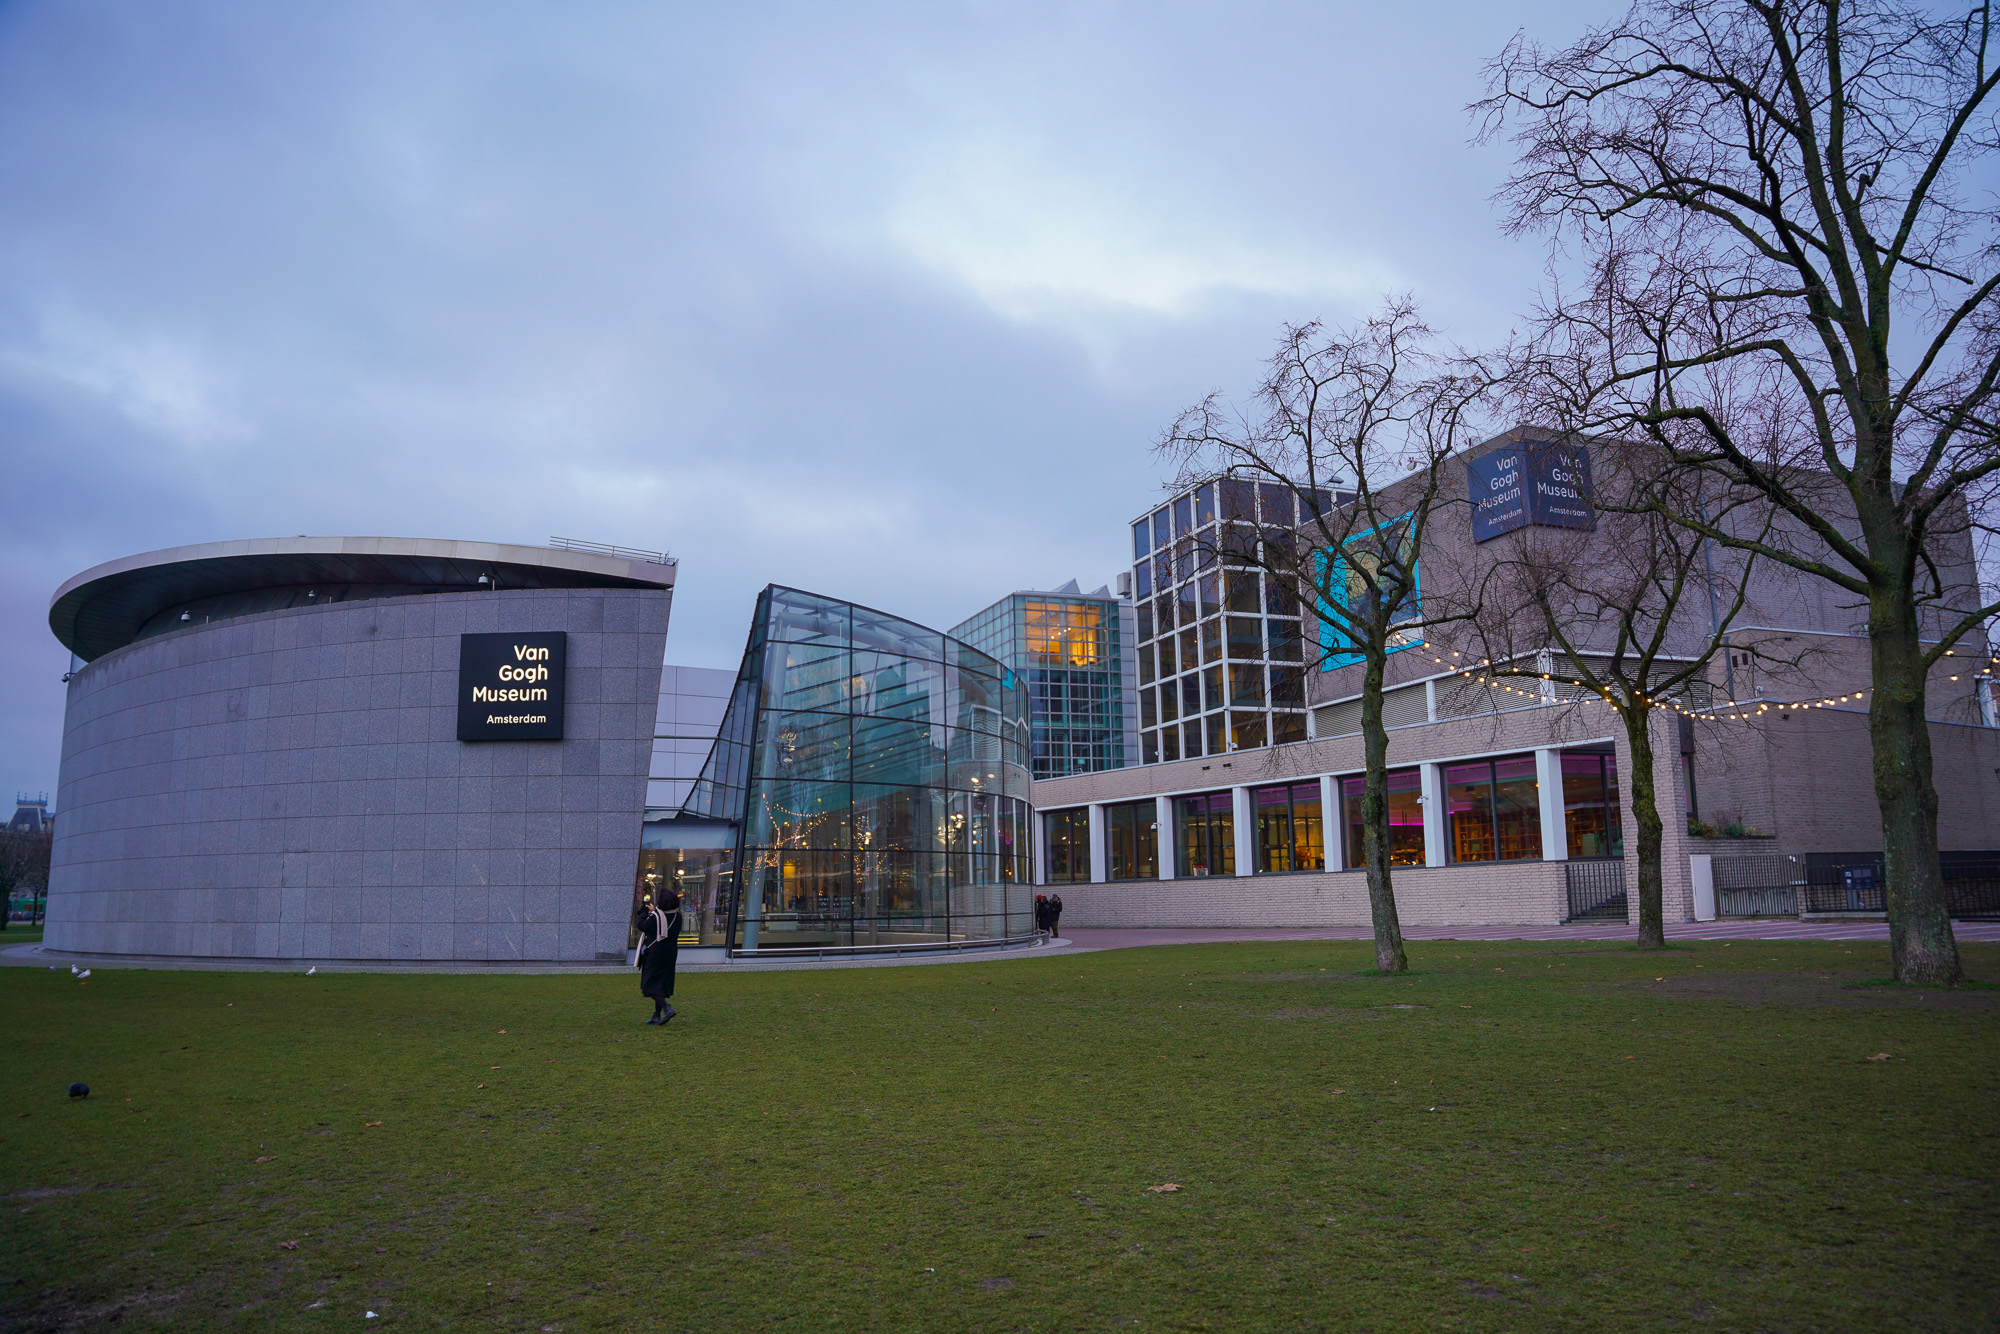 Van Gogh Museum - Opening hours and location in Amsterdam